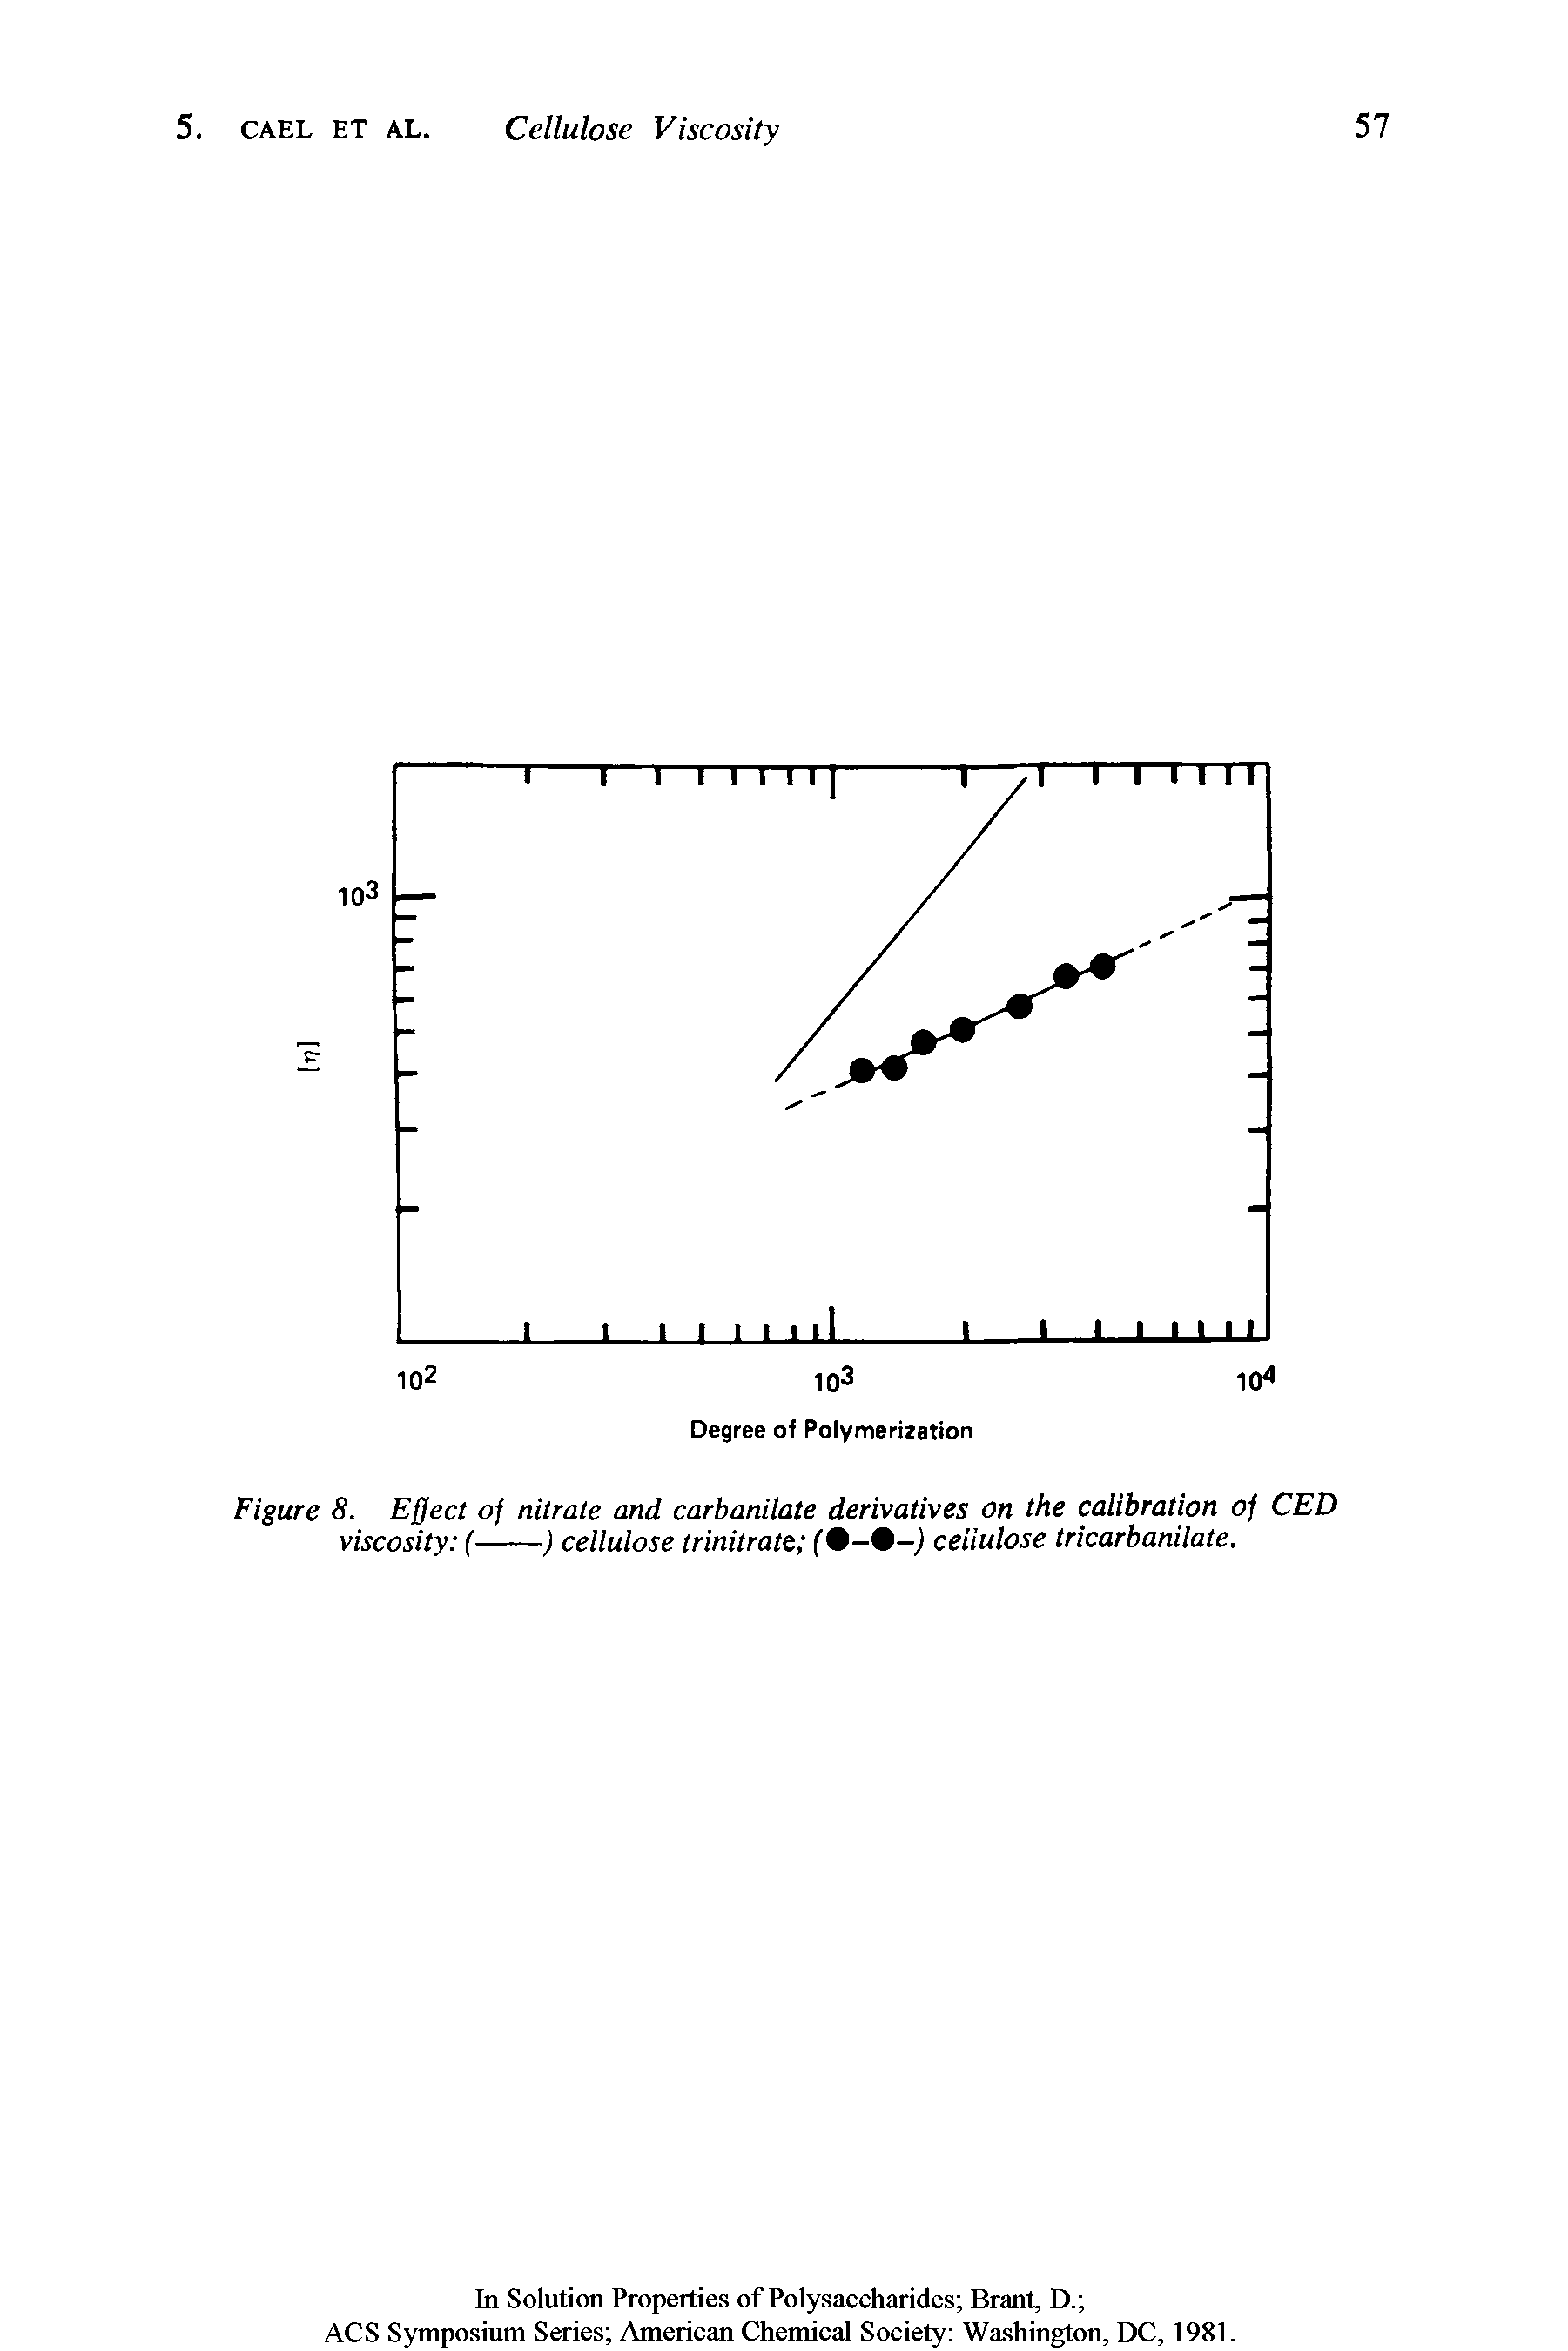 Figure 8. Effect of nitrate and carbanilate derivatives on the calibration of CED viscosity (--------------) cellulose trinitrate ( - -j cellulose tricarbanilate.